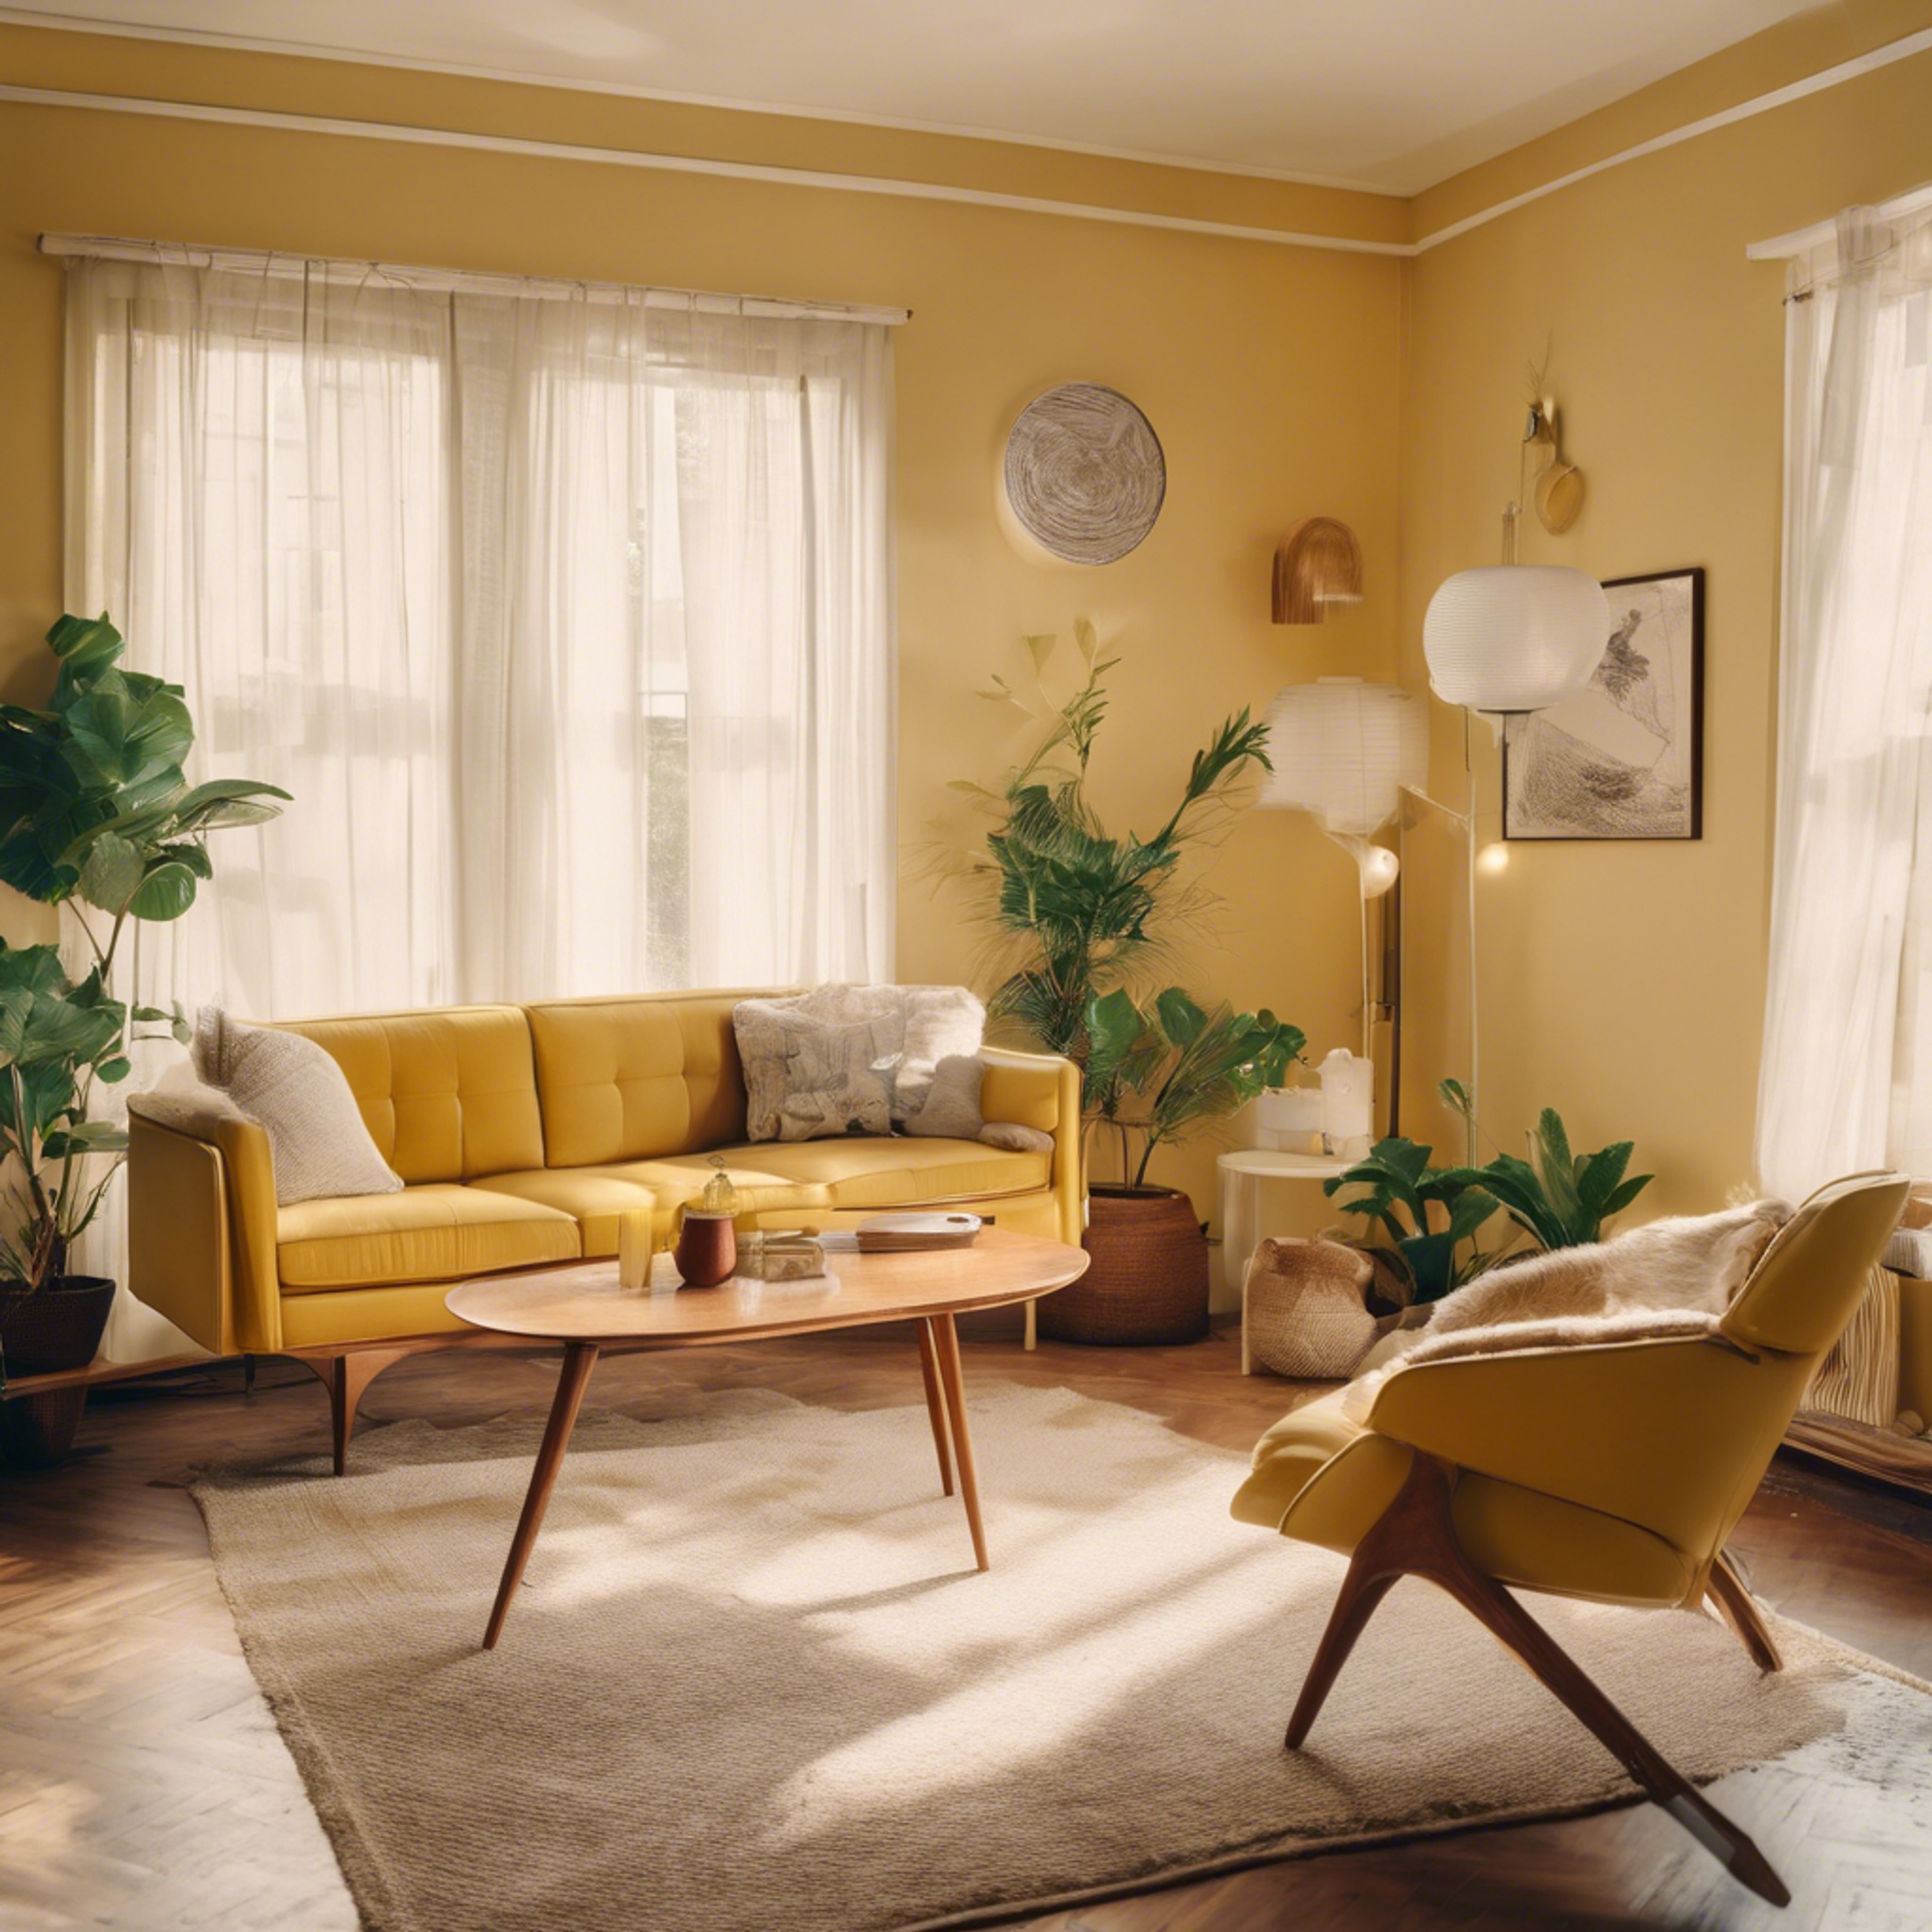 A mid-century modern living room with light yellow walls and retro furniture. Wallpaper[5118462dcdf043e4a164]